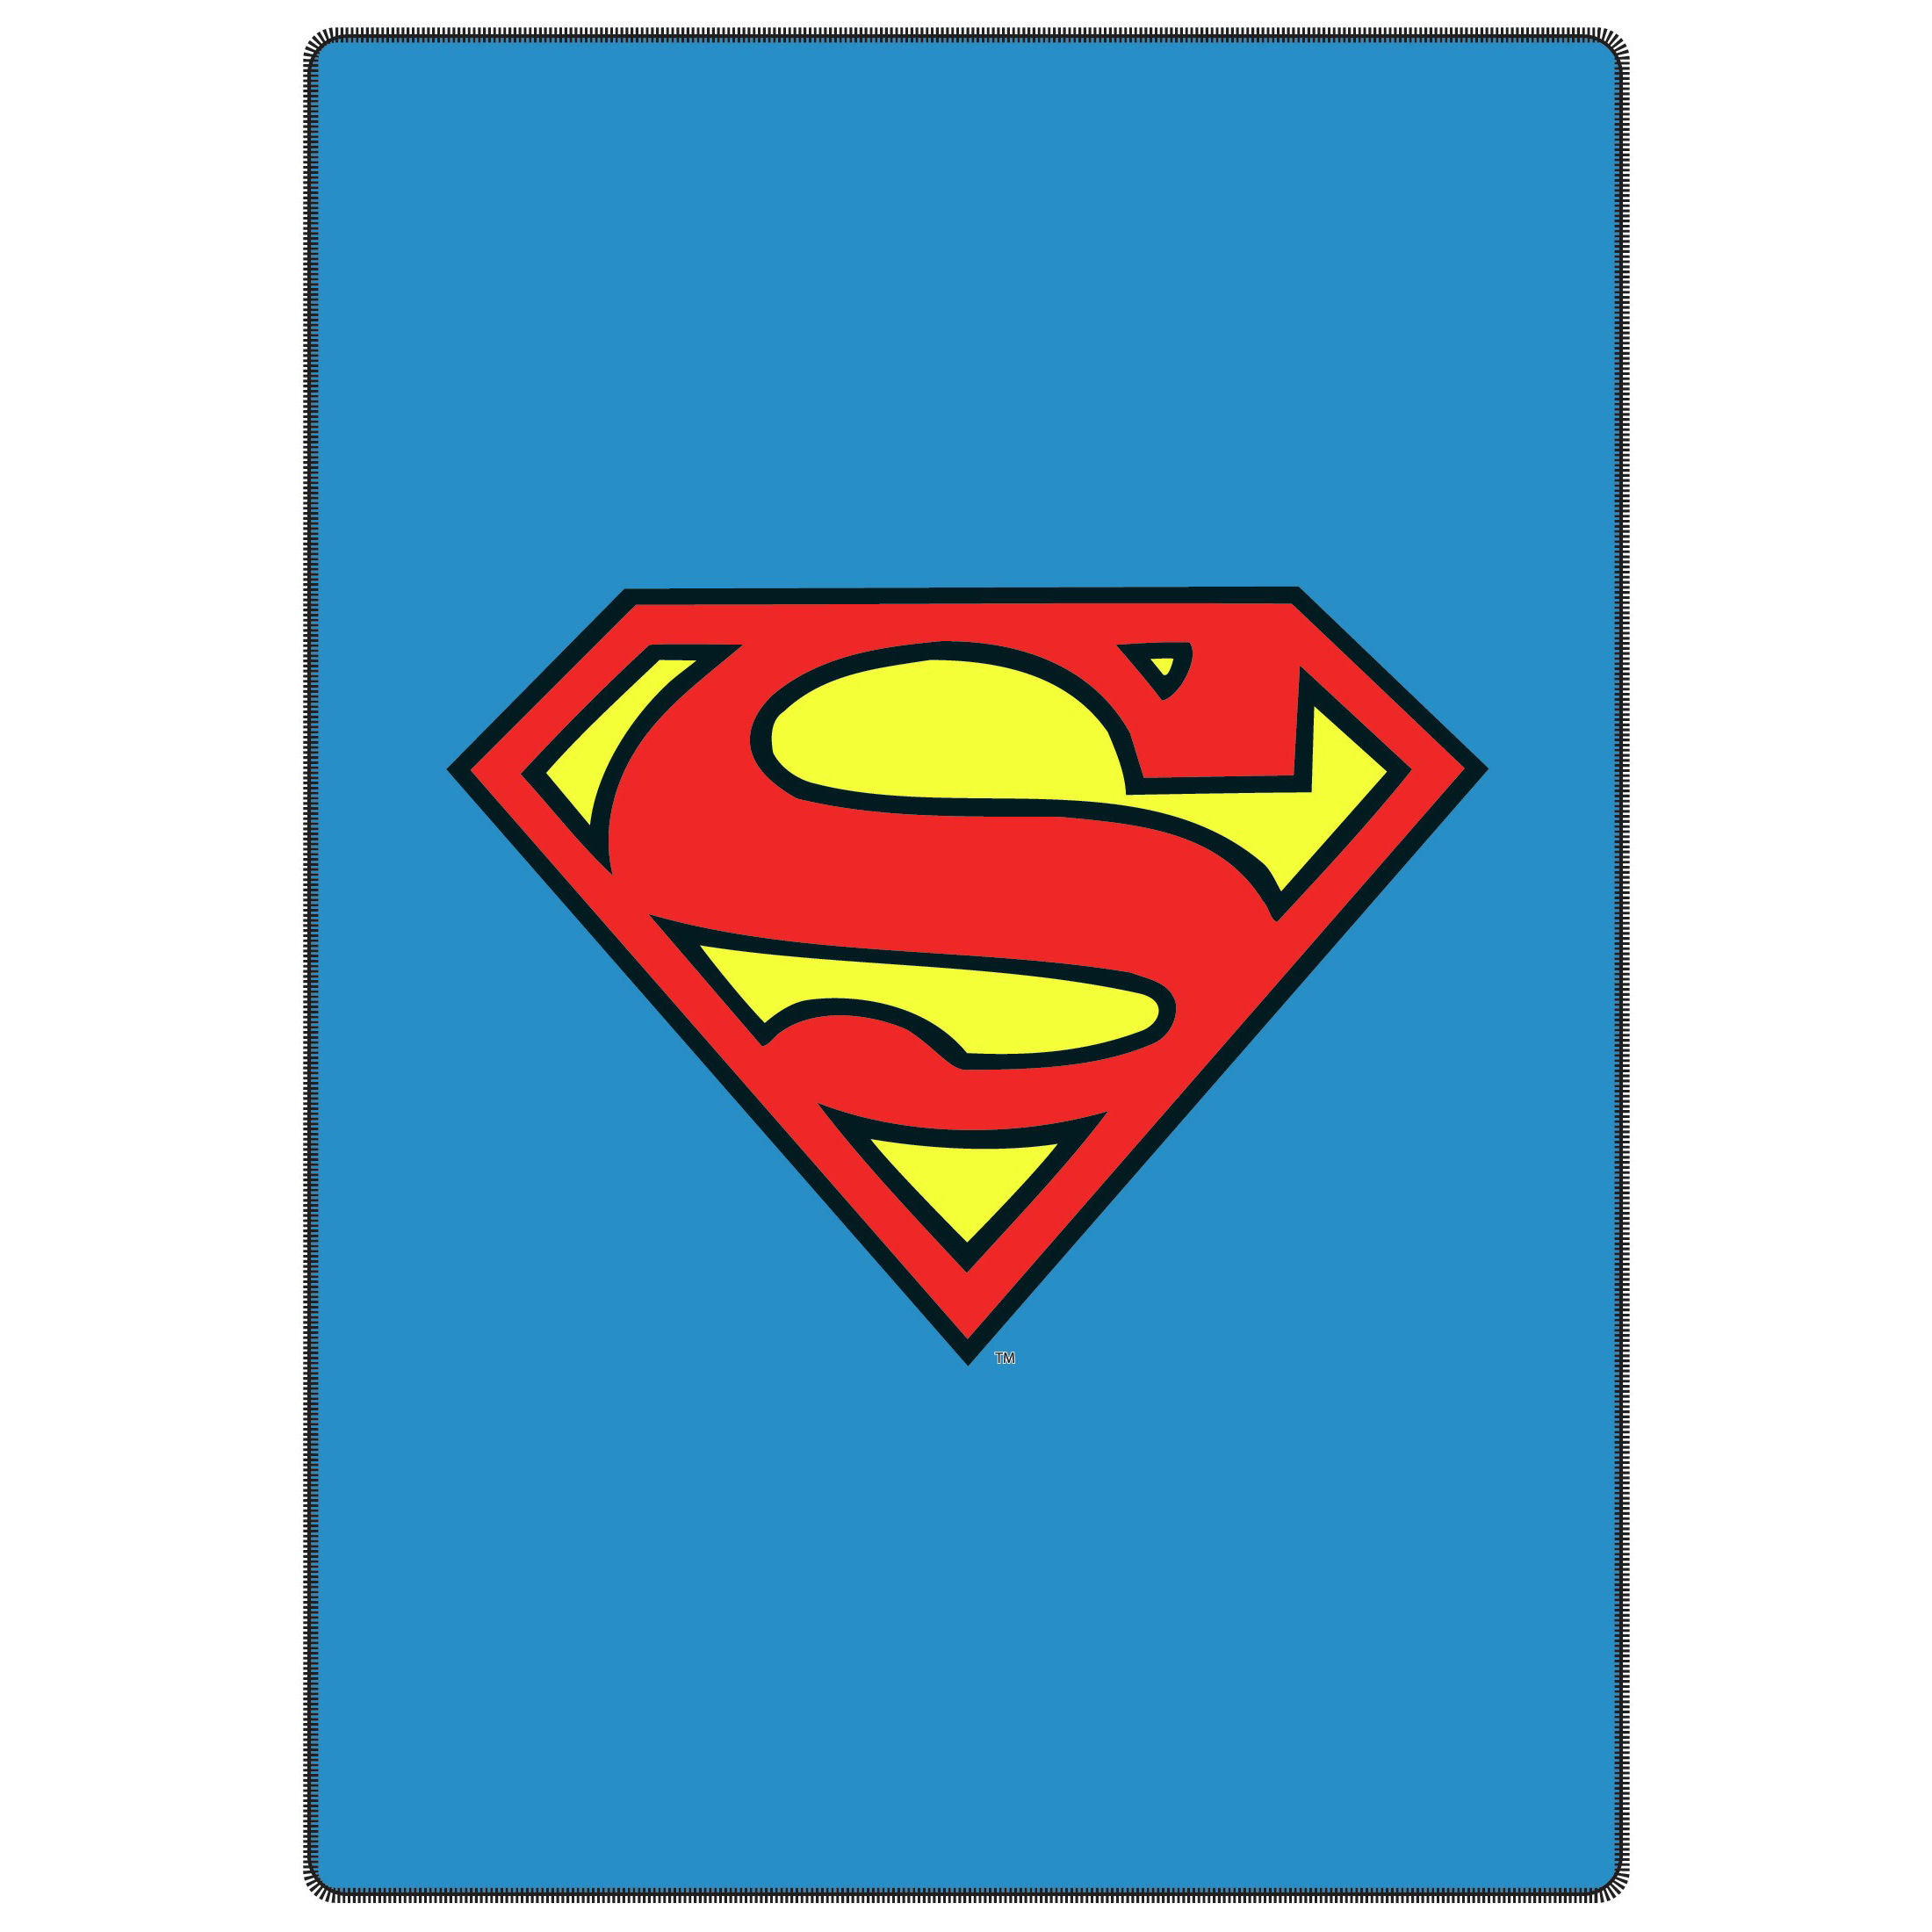 Superman Logo Generator Images & Pictures - Becuo